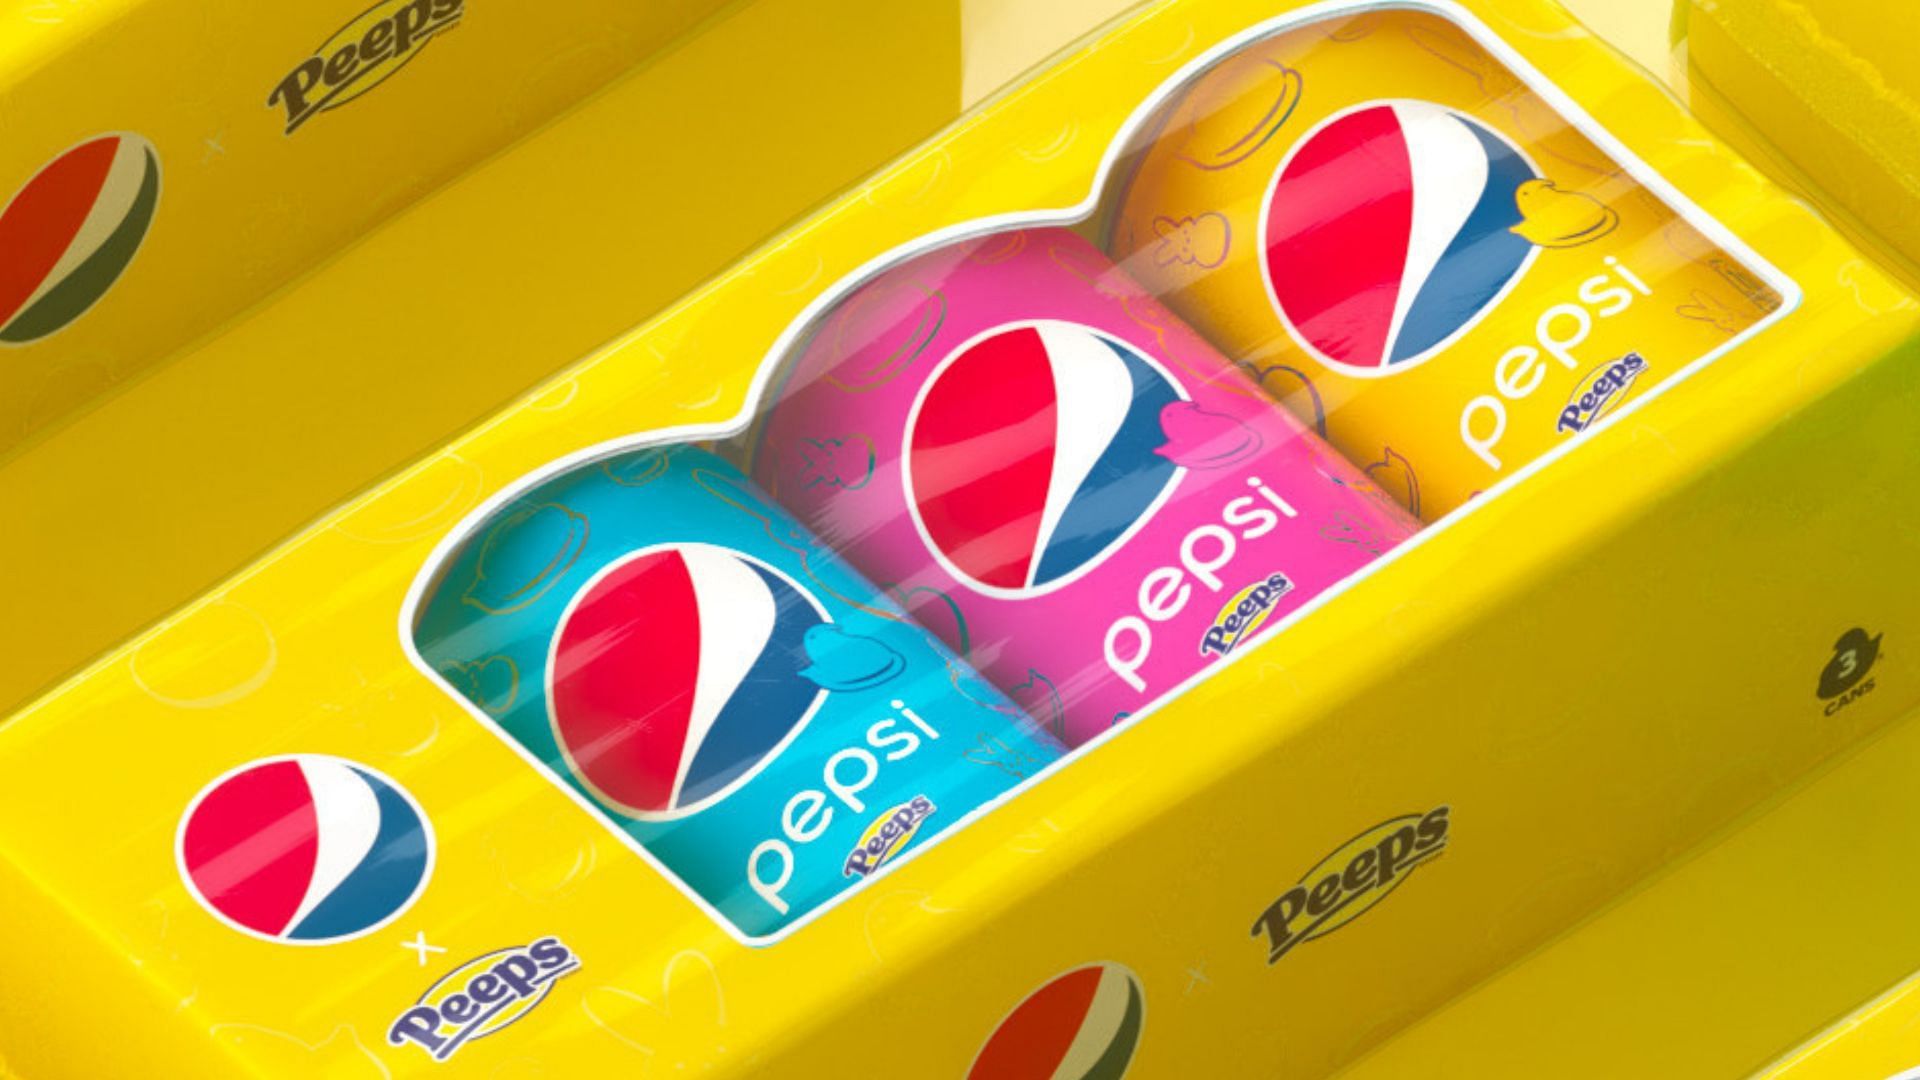 Pepsi Peeps soda will be available in bright yellow, pink, and blue cans (Image via Pepsi)